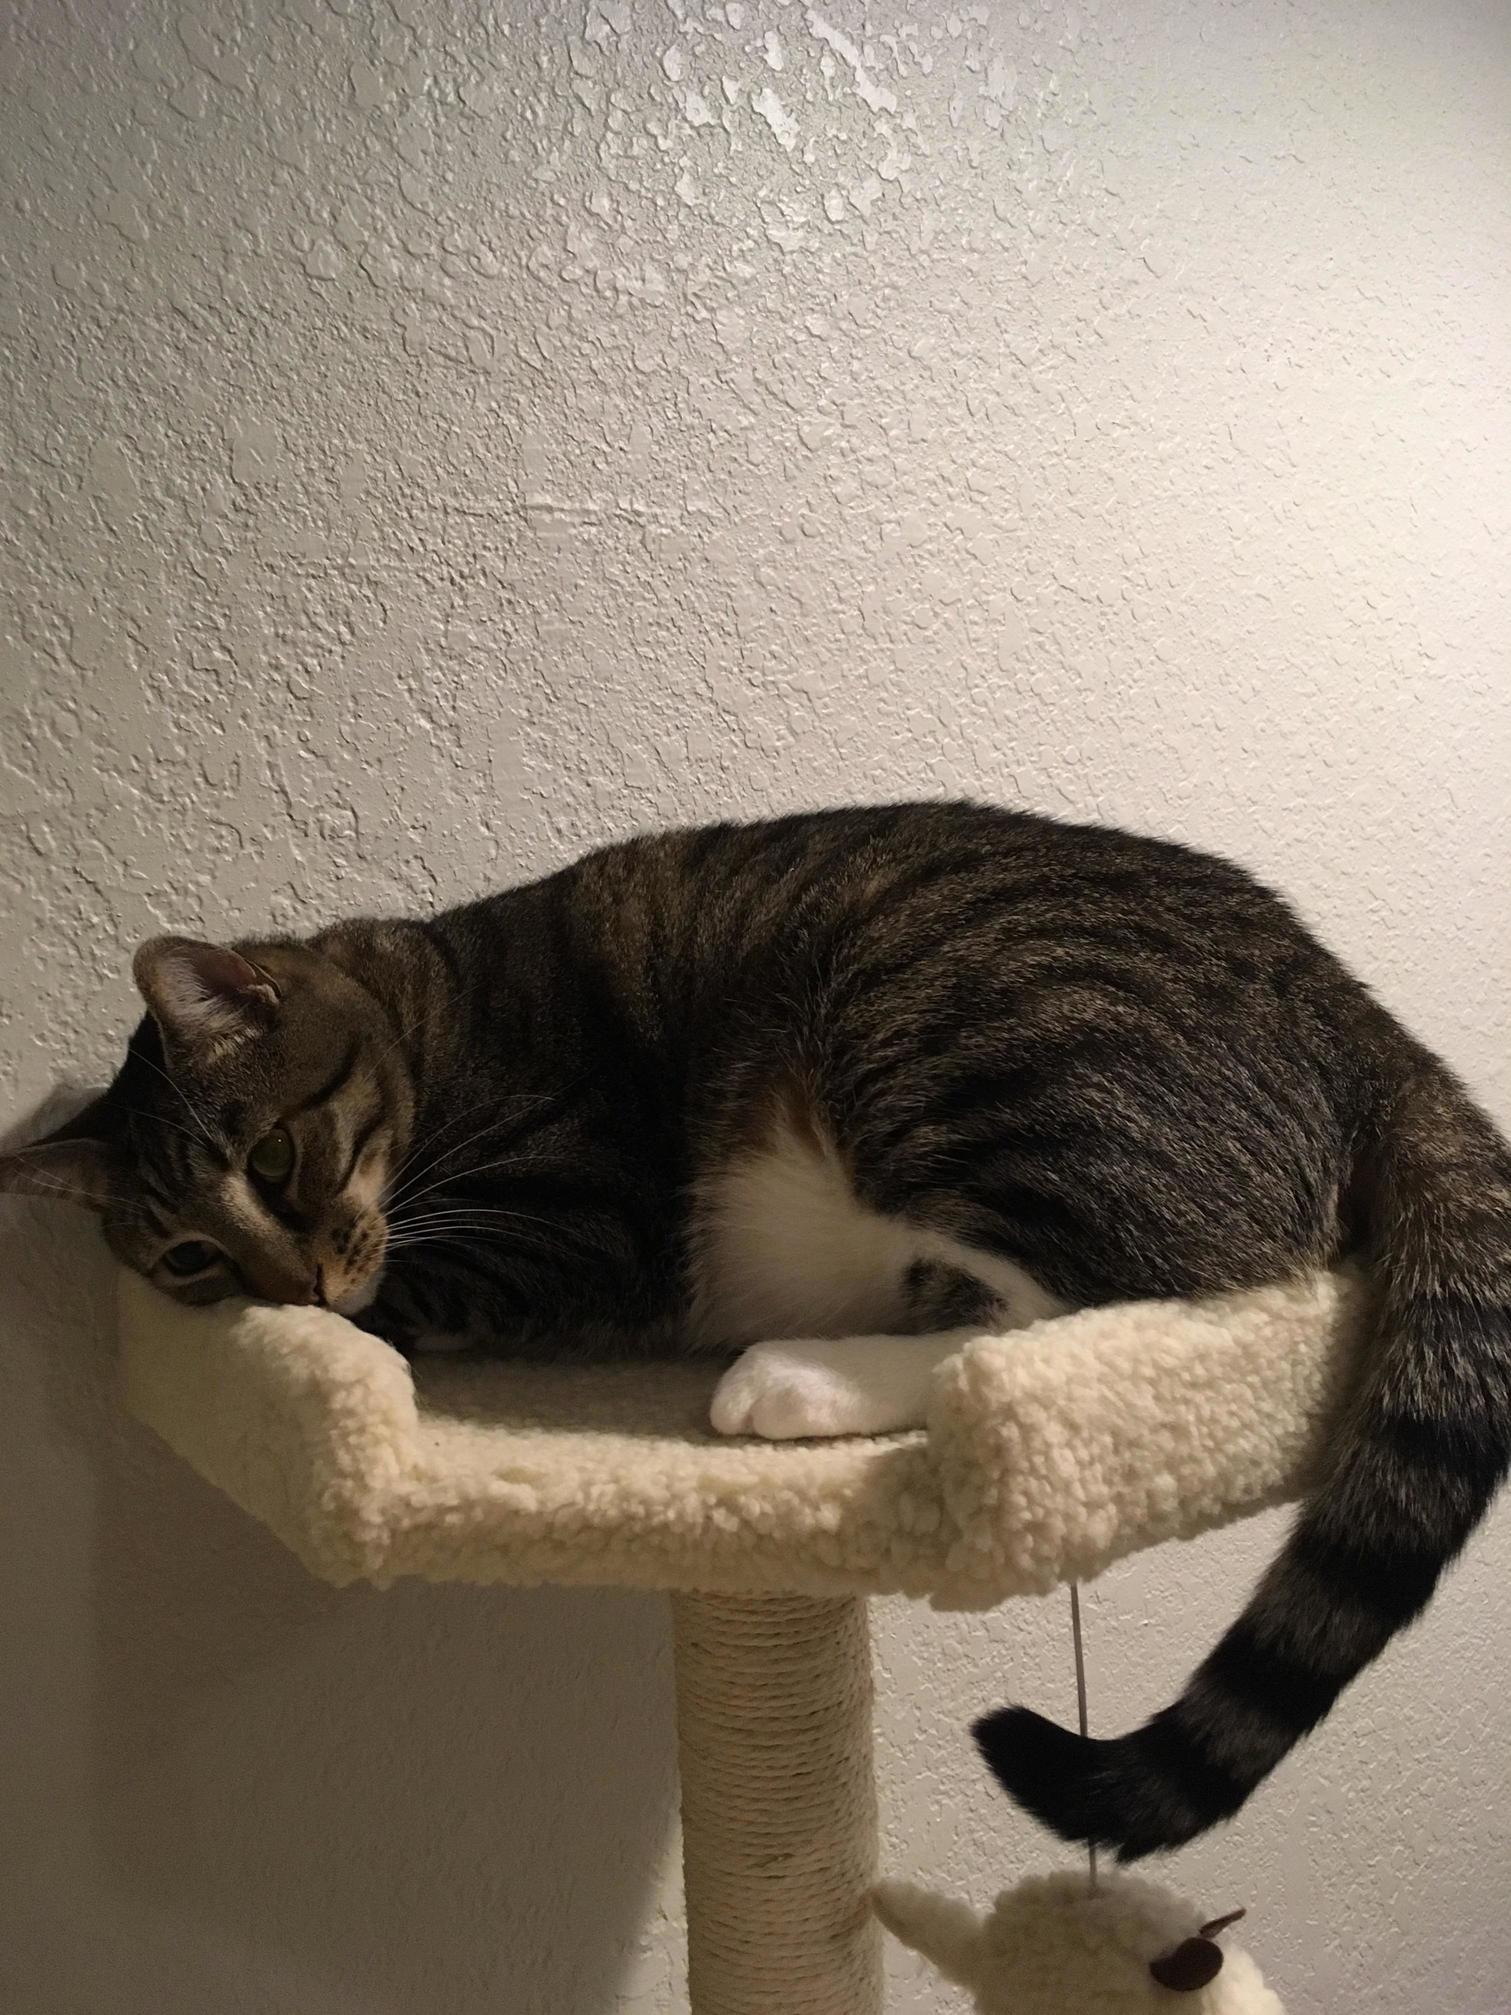 At 18lbs pancake is a little to large for the cat tree but it doesnt stop him from trying to get comfortable